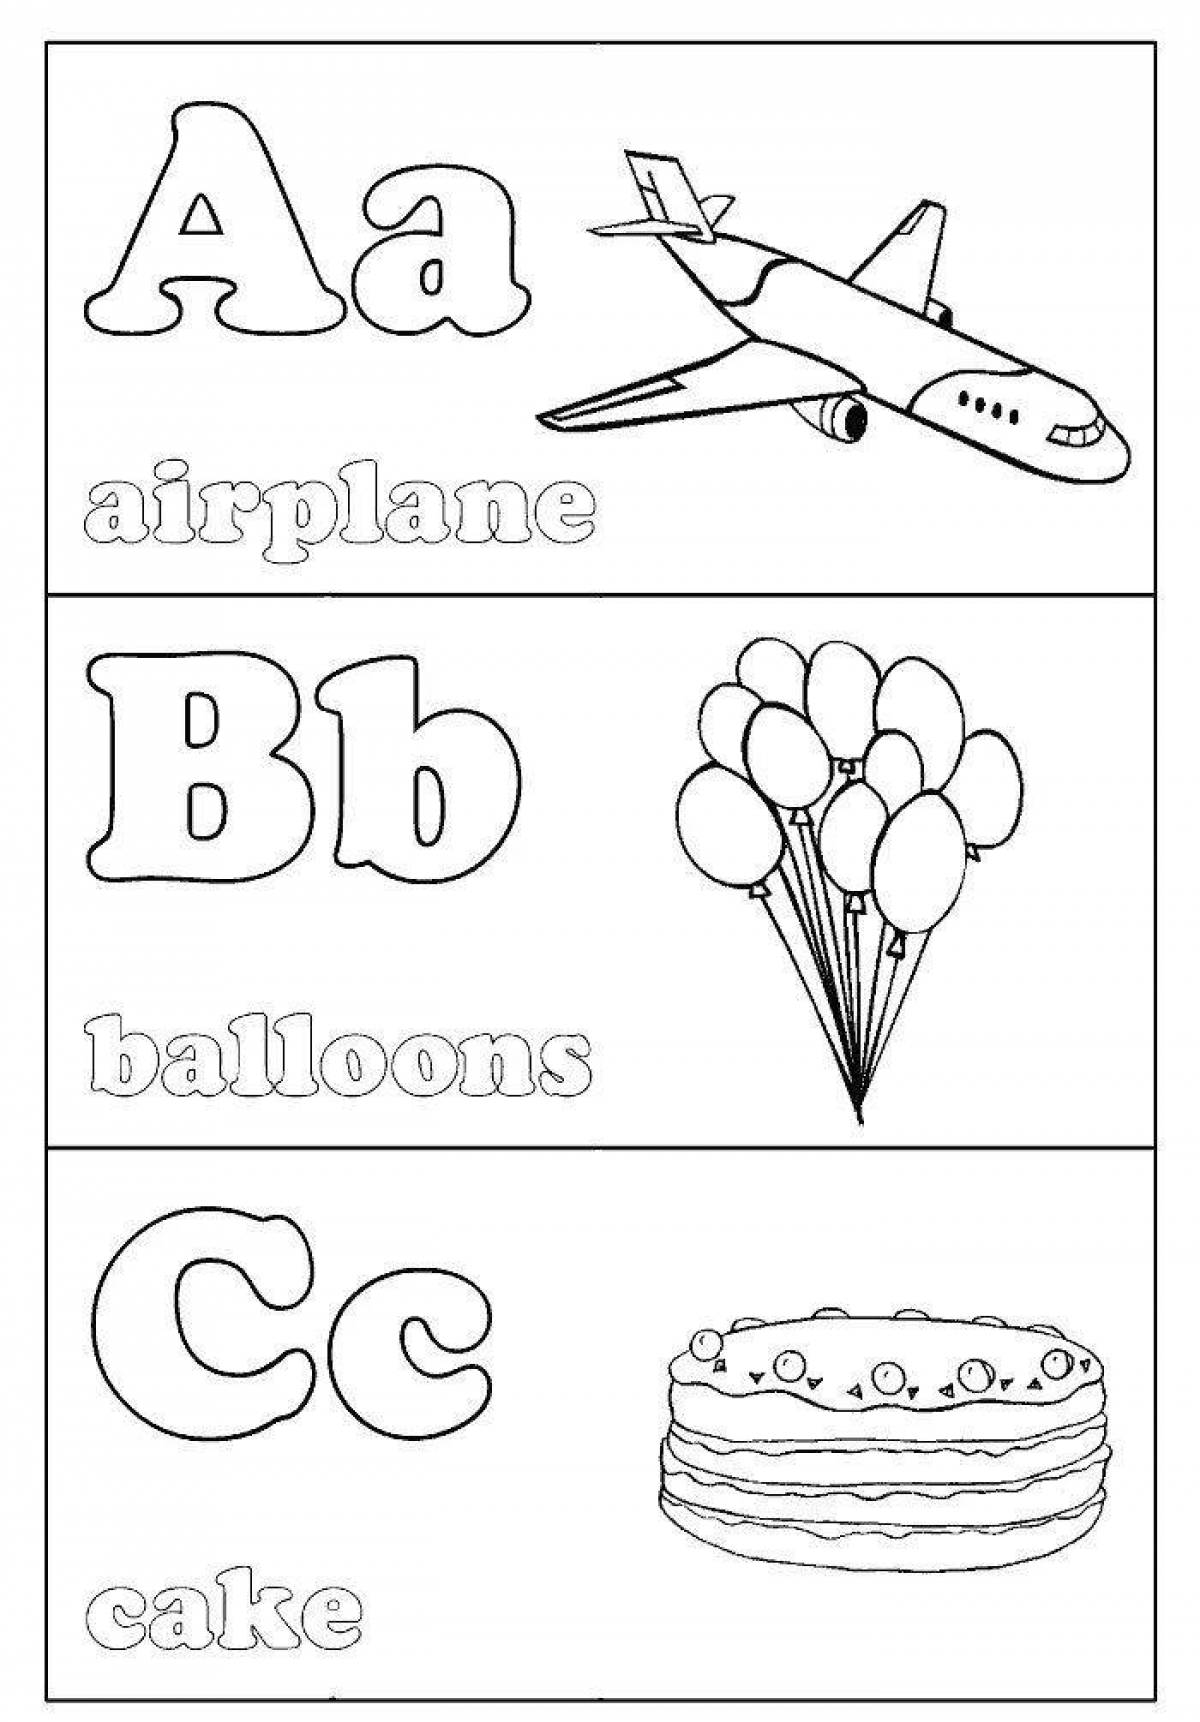 Adorable letter coloring book